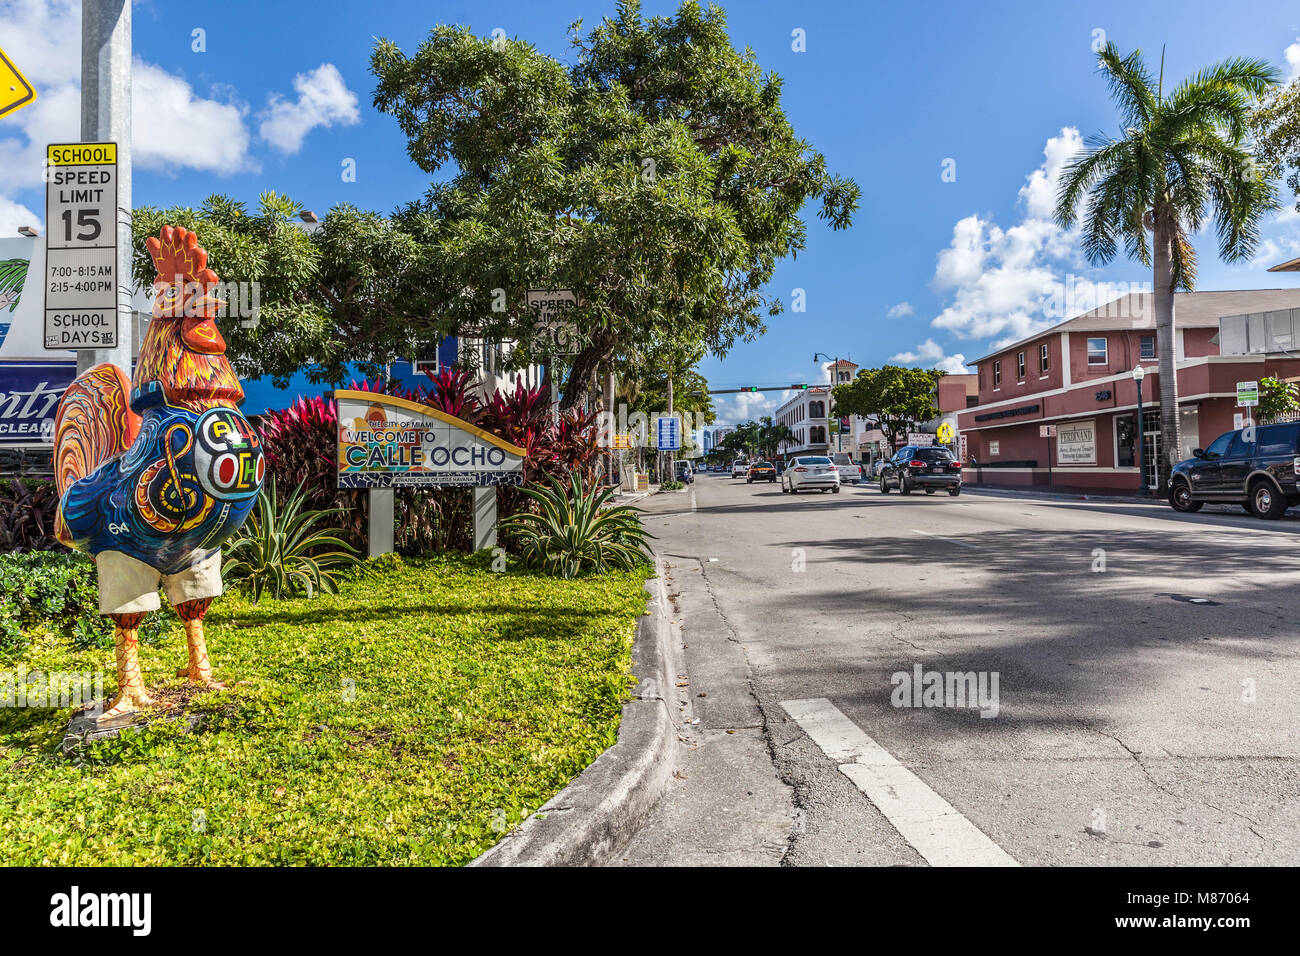 Large and colourful rooster sculpture on the roadside, Calle Ocho, Little Havana, Miami, Florida, USA. Stock Photo